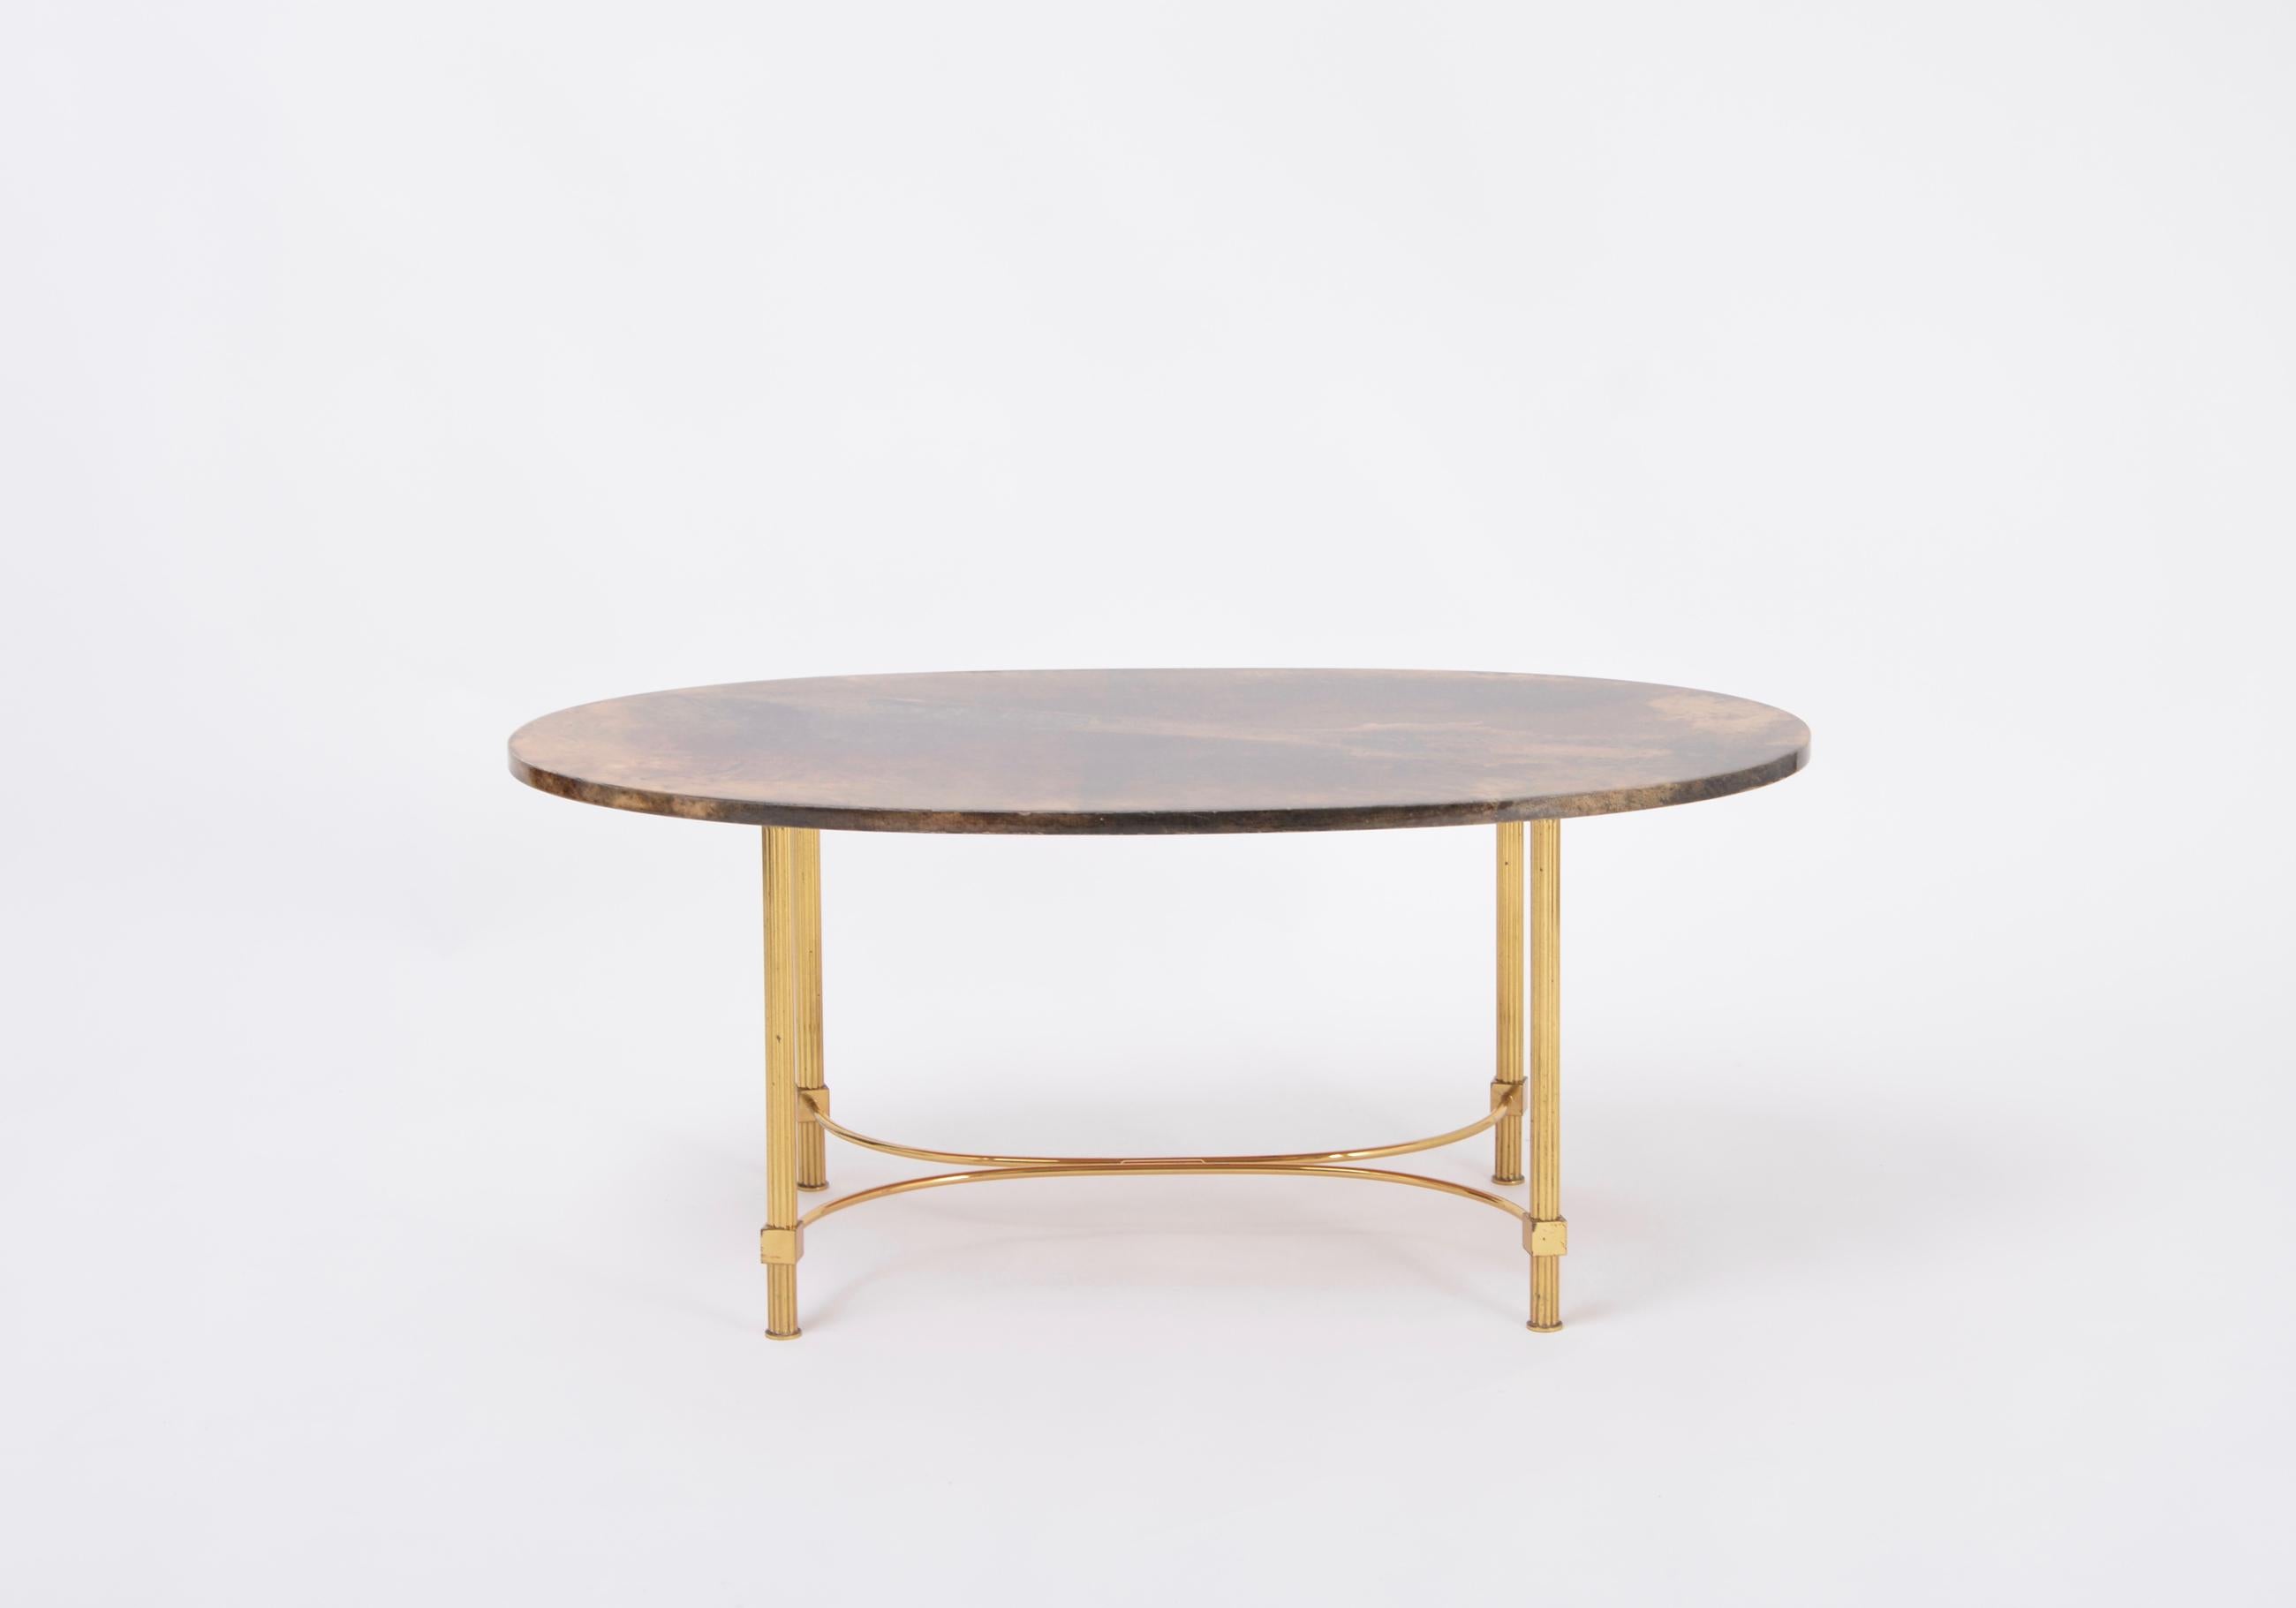 Brown Italian Midcentury Coffee or Side Table by Aldo Tura in Goat Skin
Simple and classical coffee table or side table designed and produced by Aldo Tura (1909-1963).
The oval table top is made of brown parchment, which is sealed with shellac, the